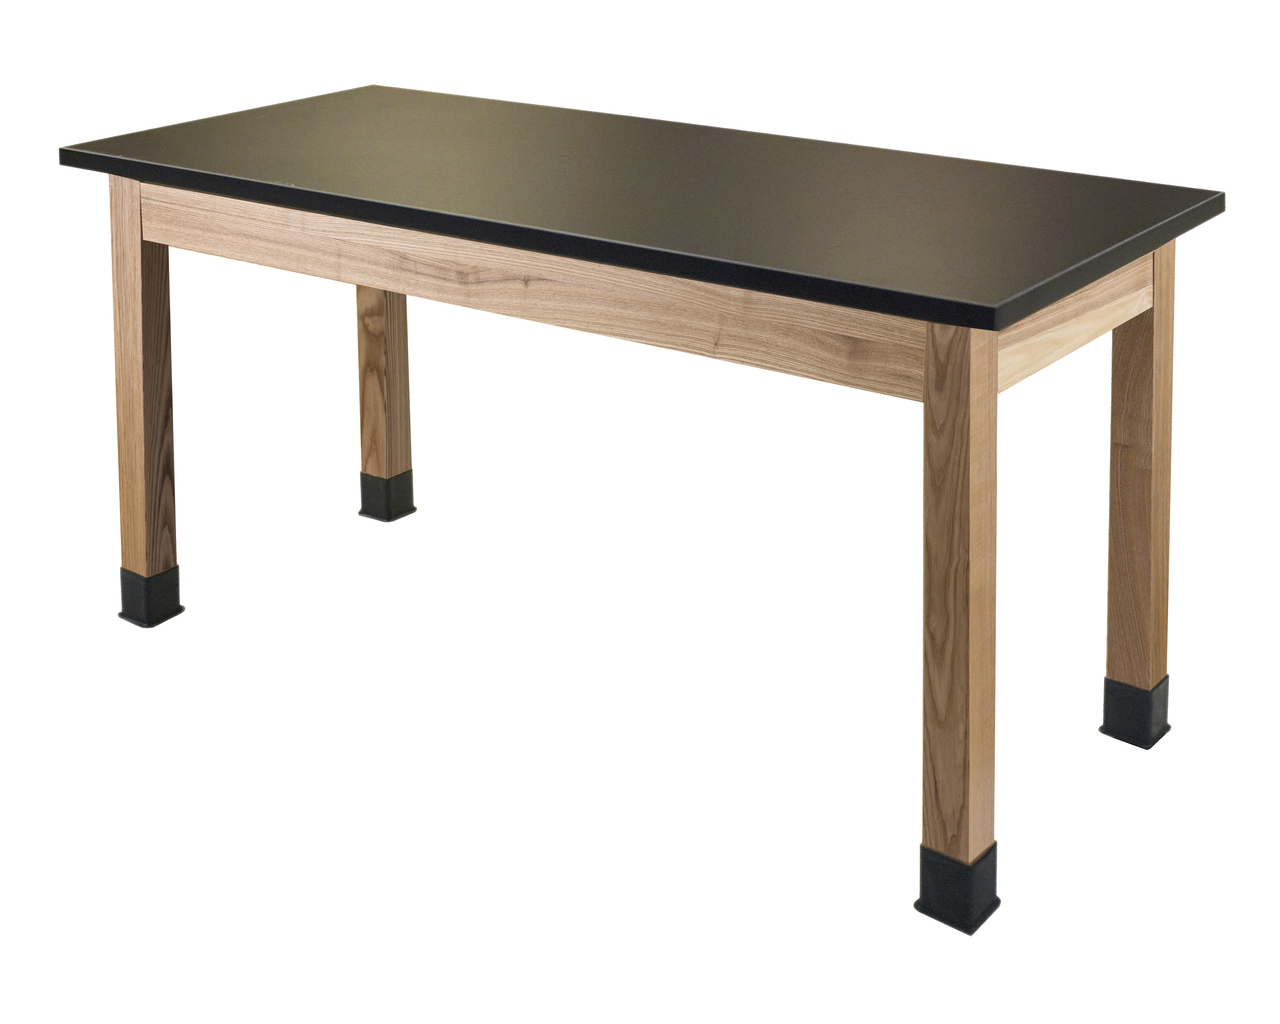 NPS Wood Science Lab Table -  24"x54"x36" -  Chemical Resistant Top - Black Top and Ash Leg